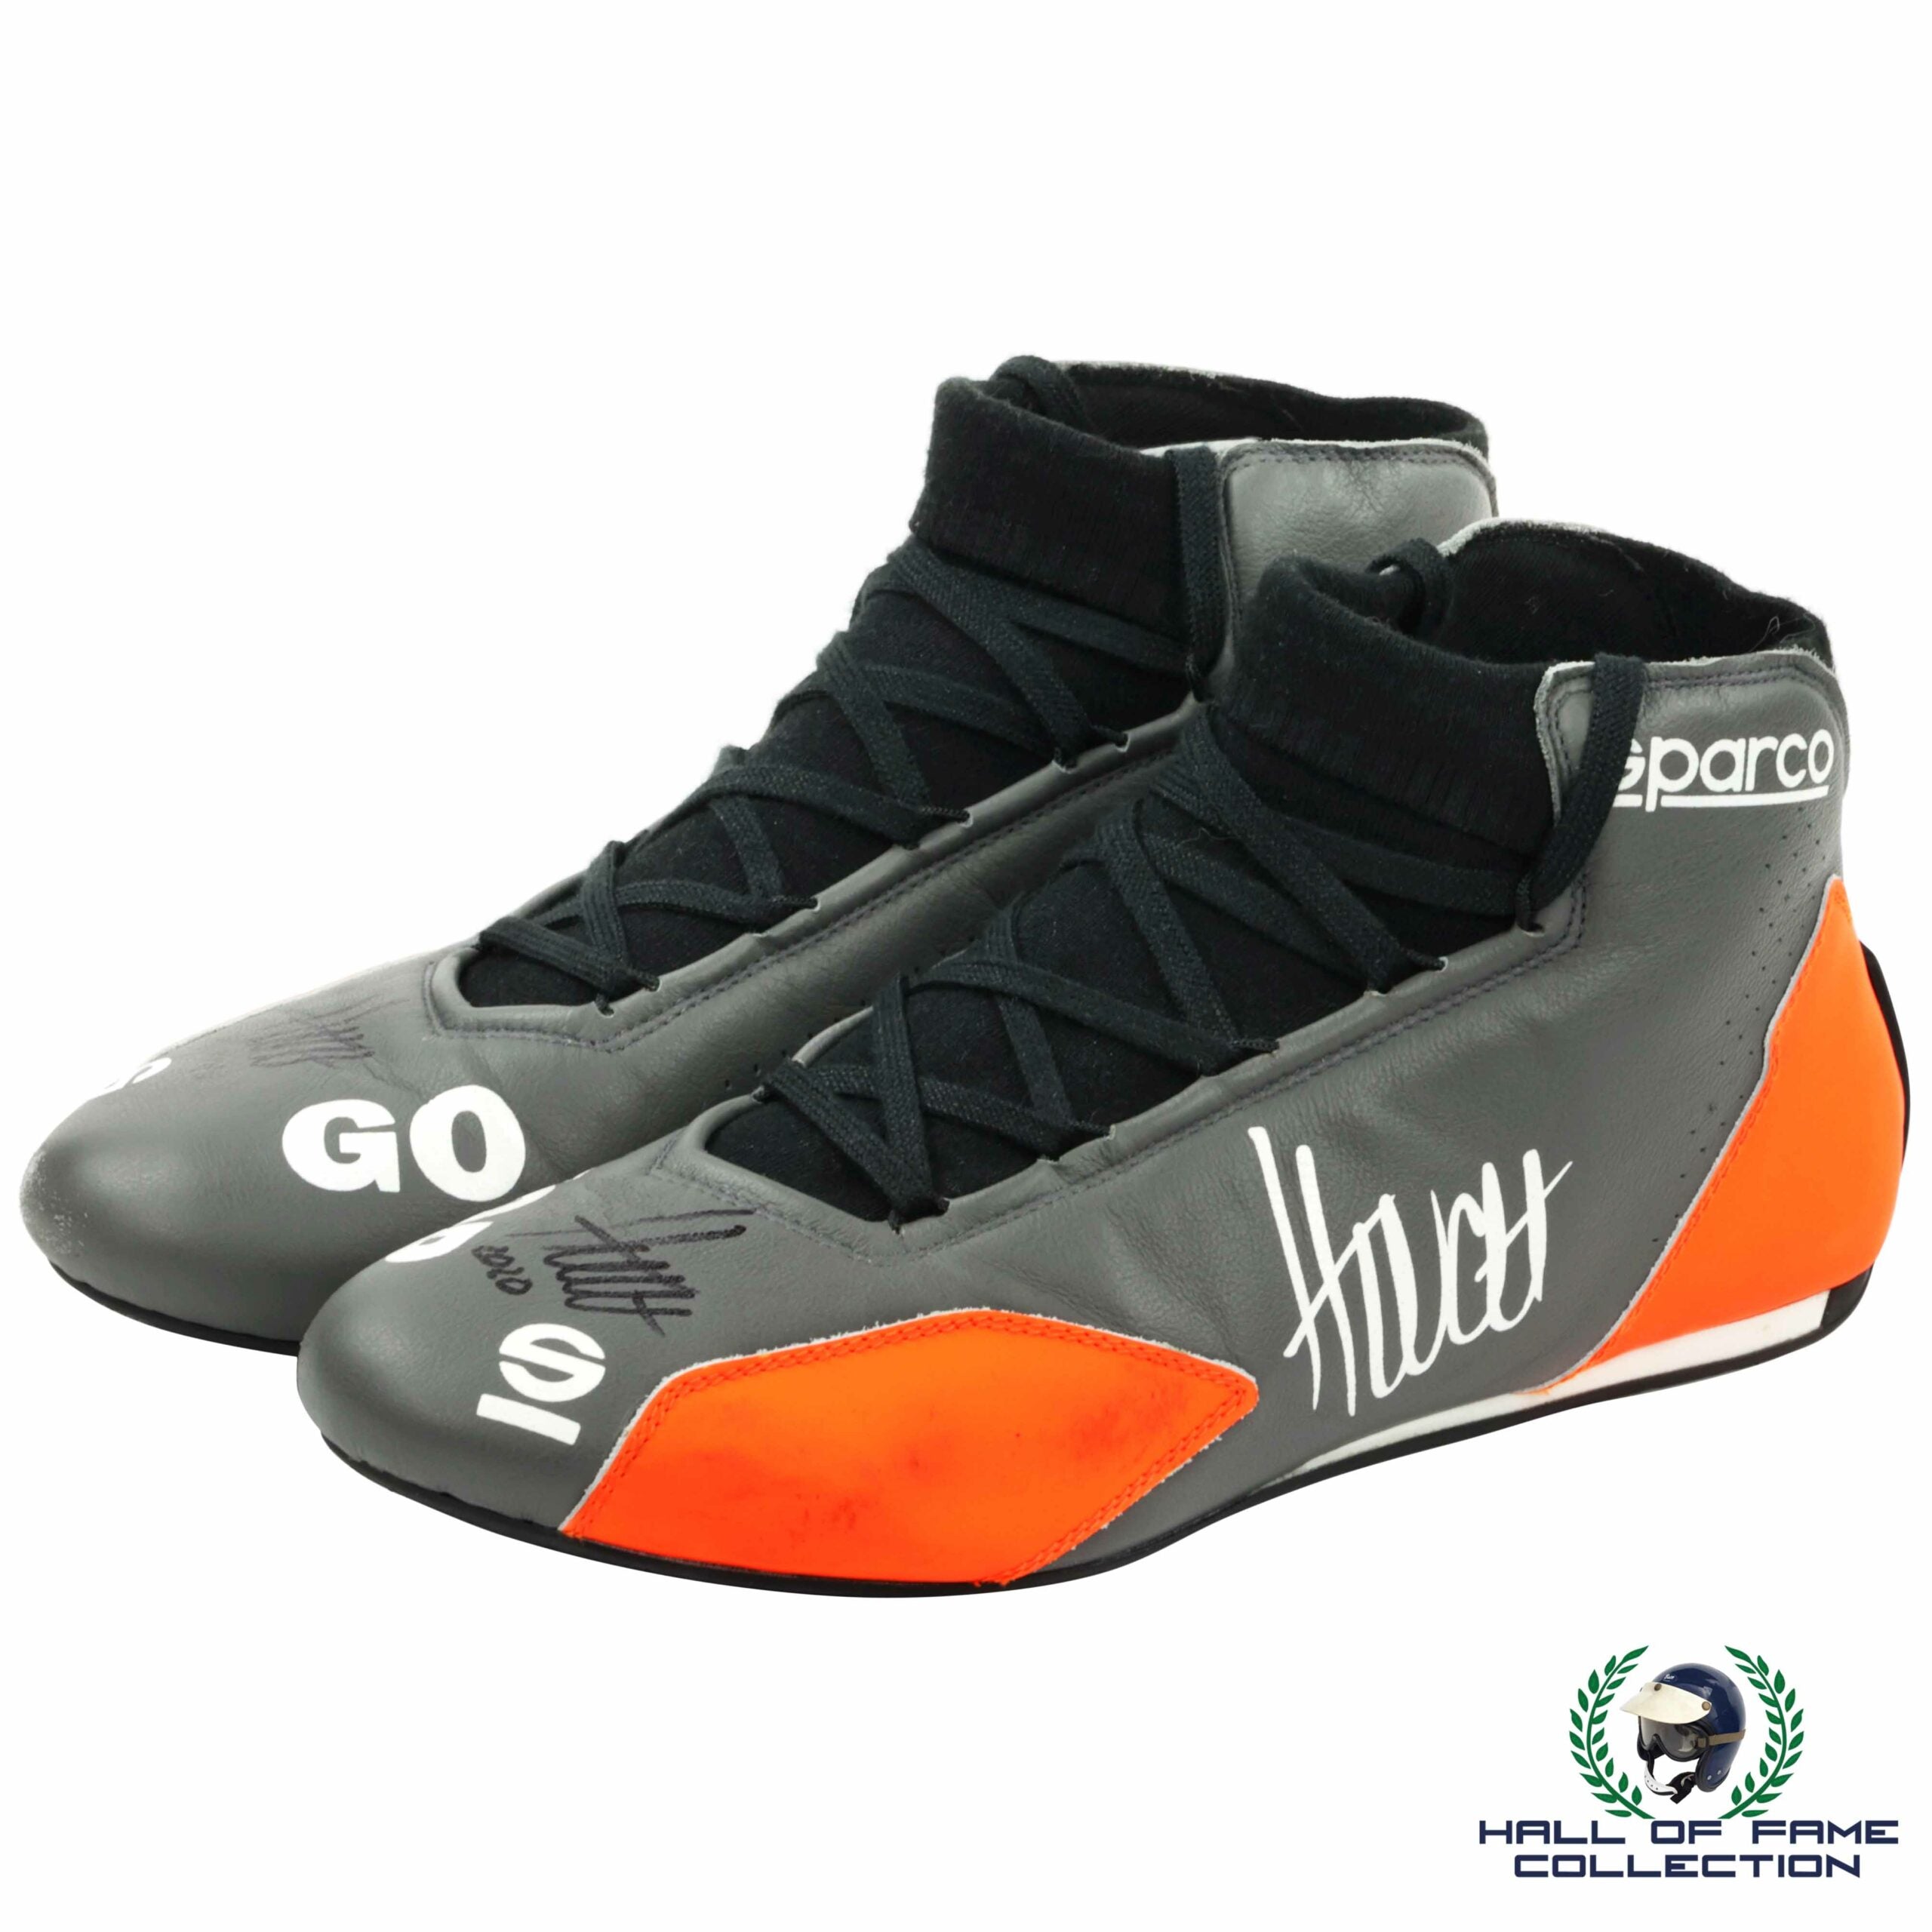 2020 James Hinchcliffe Signed Race Used Andretti Autosport IndyCar Boots